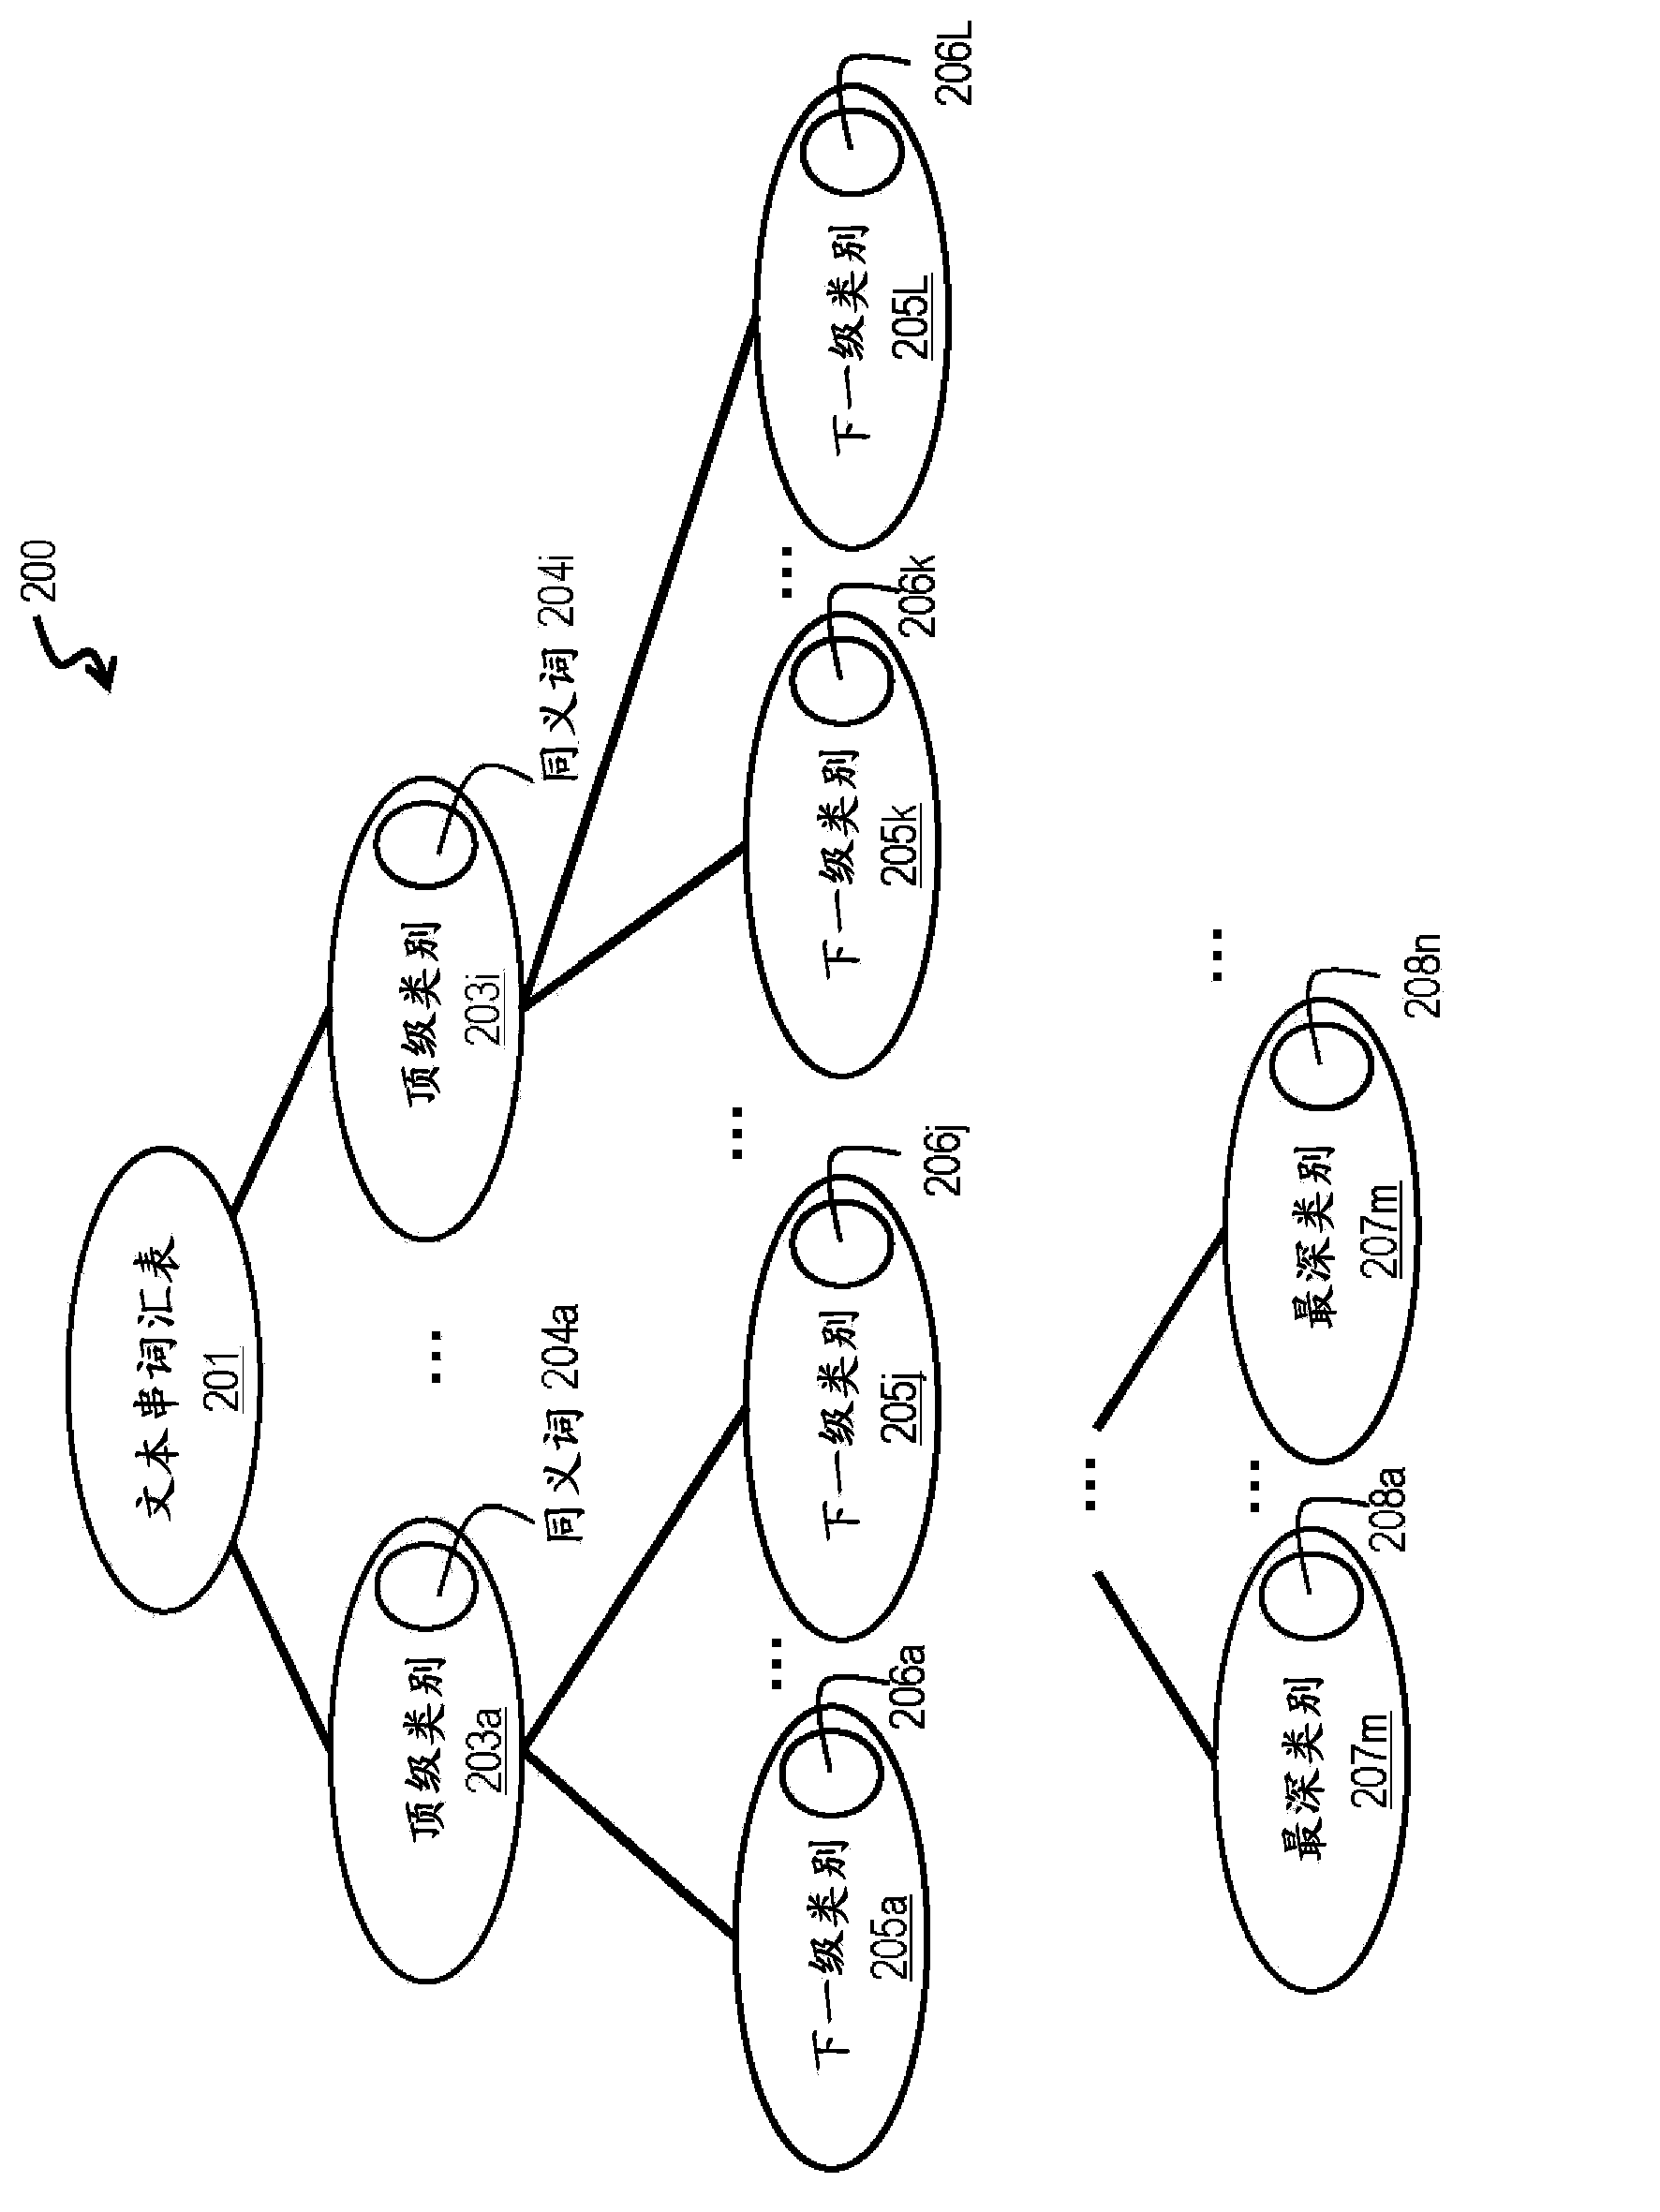 Method and apparatus for identifying conversation in multiple strings